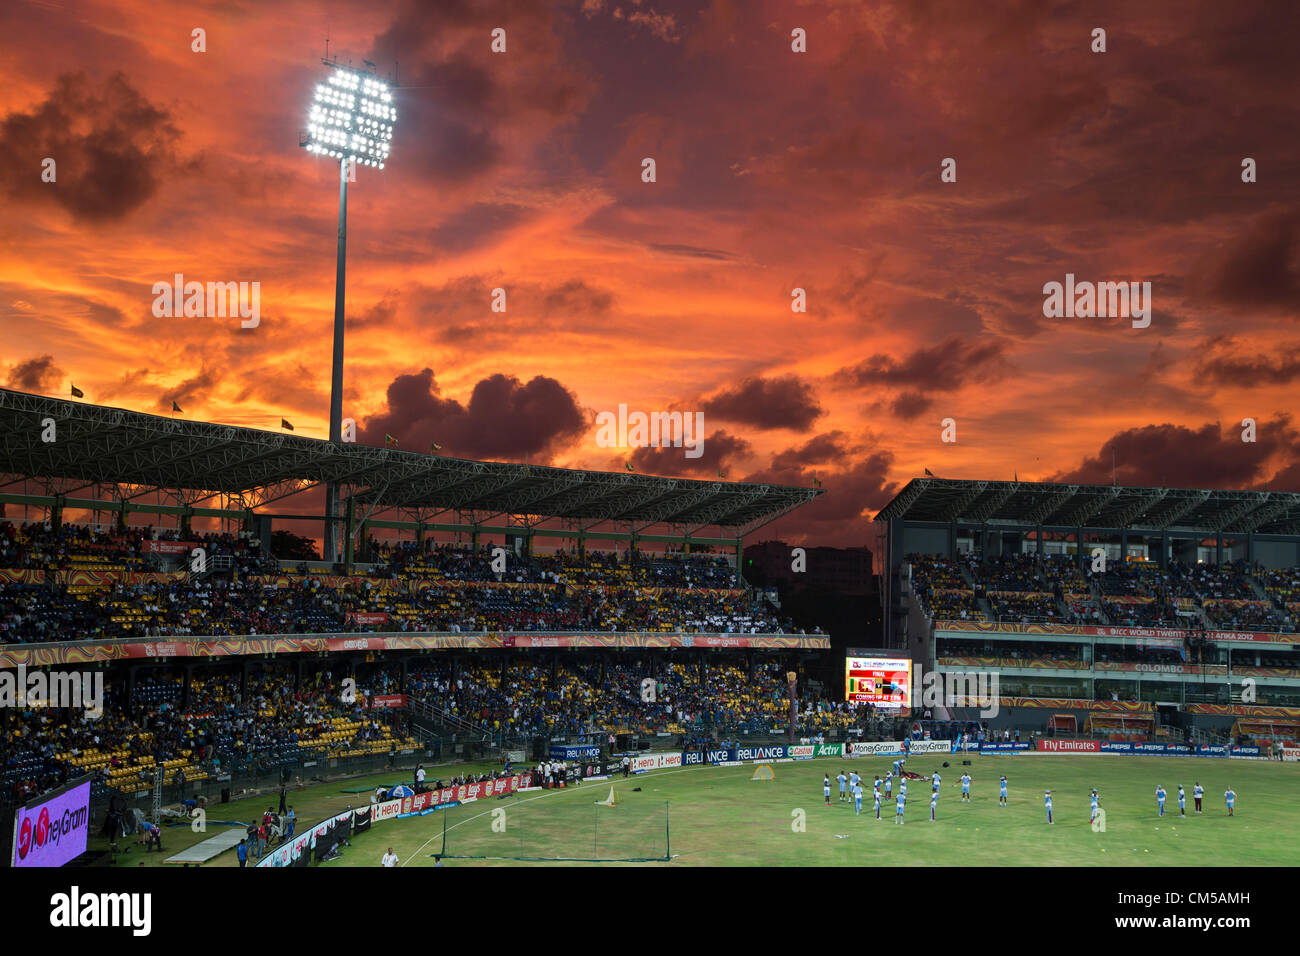 A fiery sky awaits the West Indians warming up before the start of the finals Stock Photo